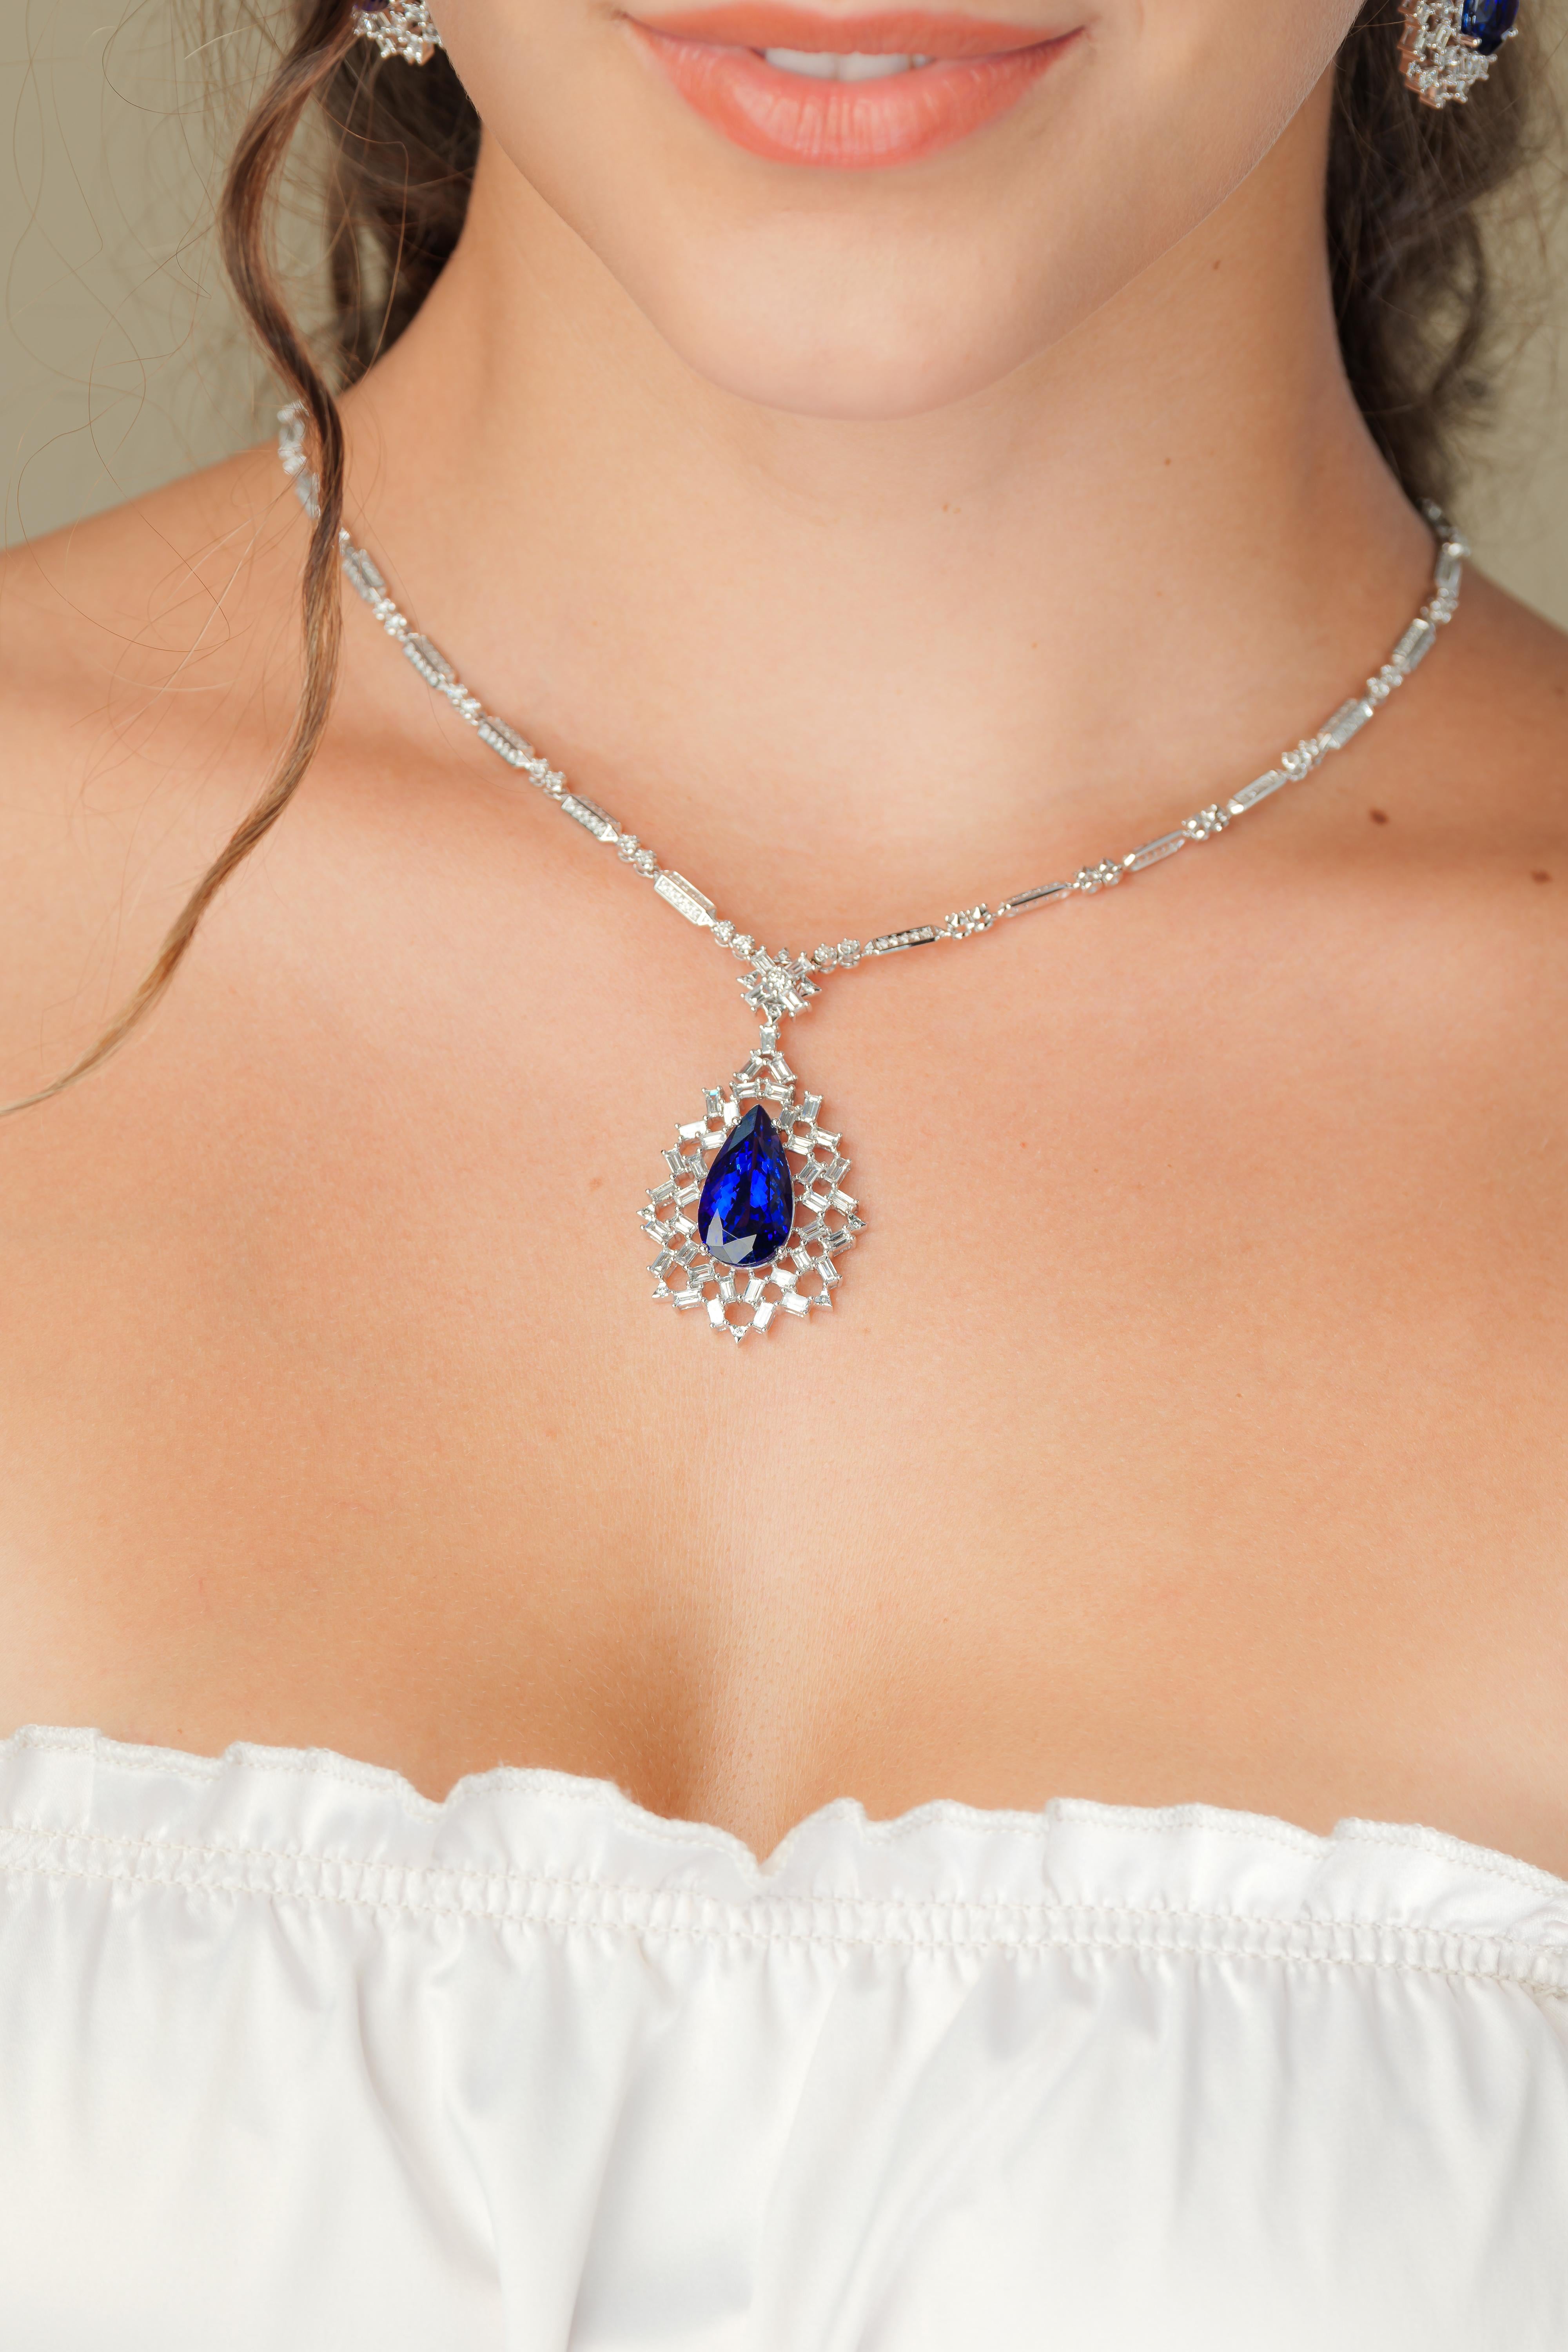 Snowflake Tanzanites! This collection features elegant pear shaped Taznzanites that are encompassed by a cage of baguette cut icy white diamonds set in white gold.

Snowflake tanzanite and diamond necklace in 18K white gold. 

Tanzanite: 11.97 carat